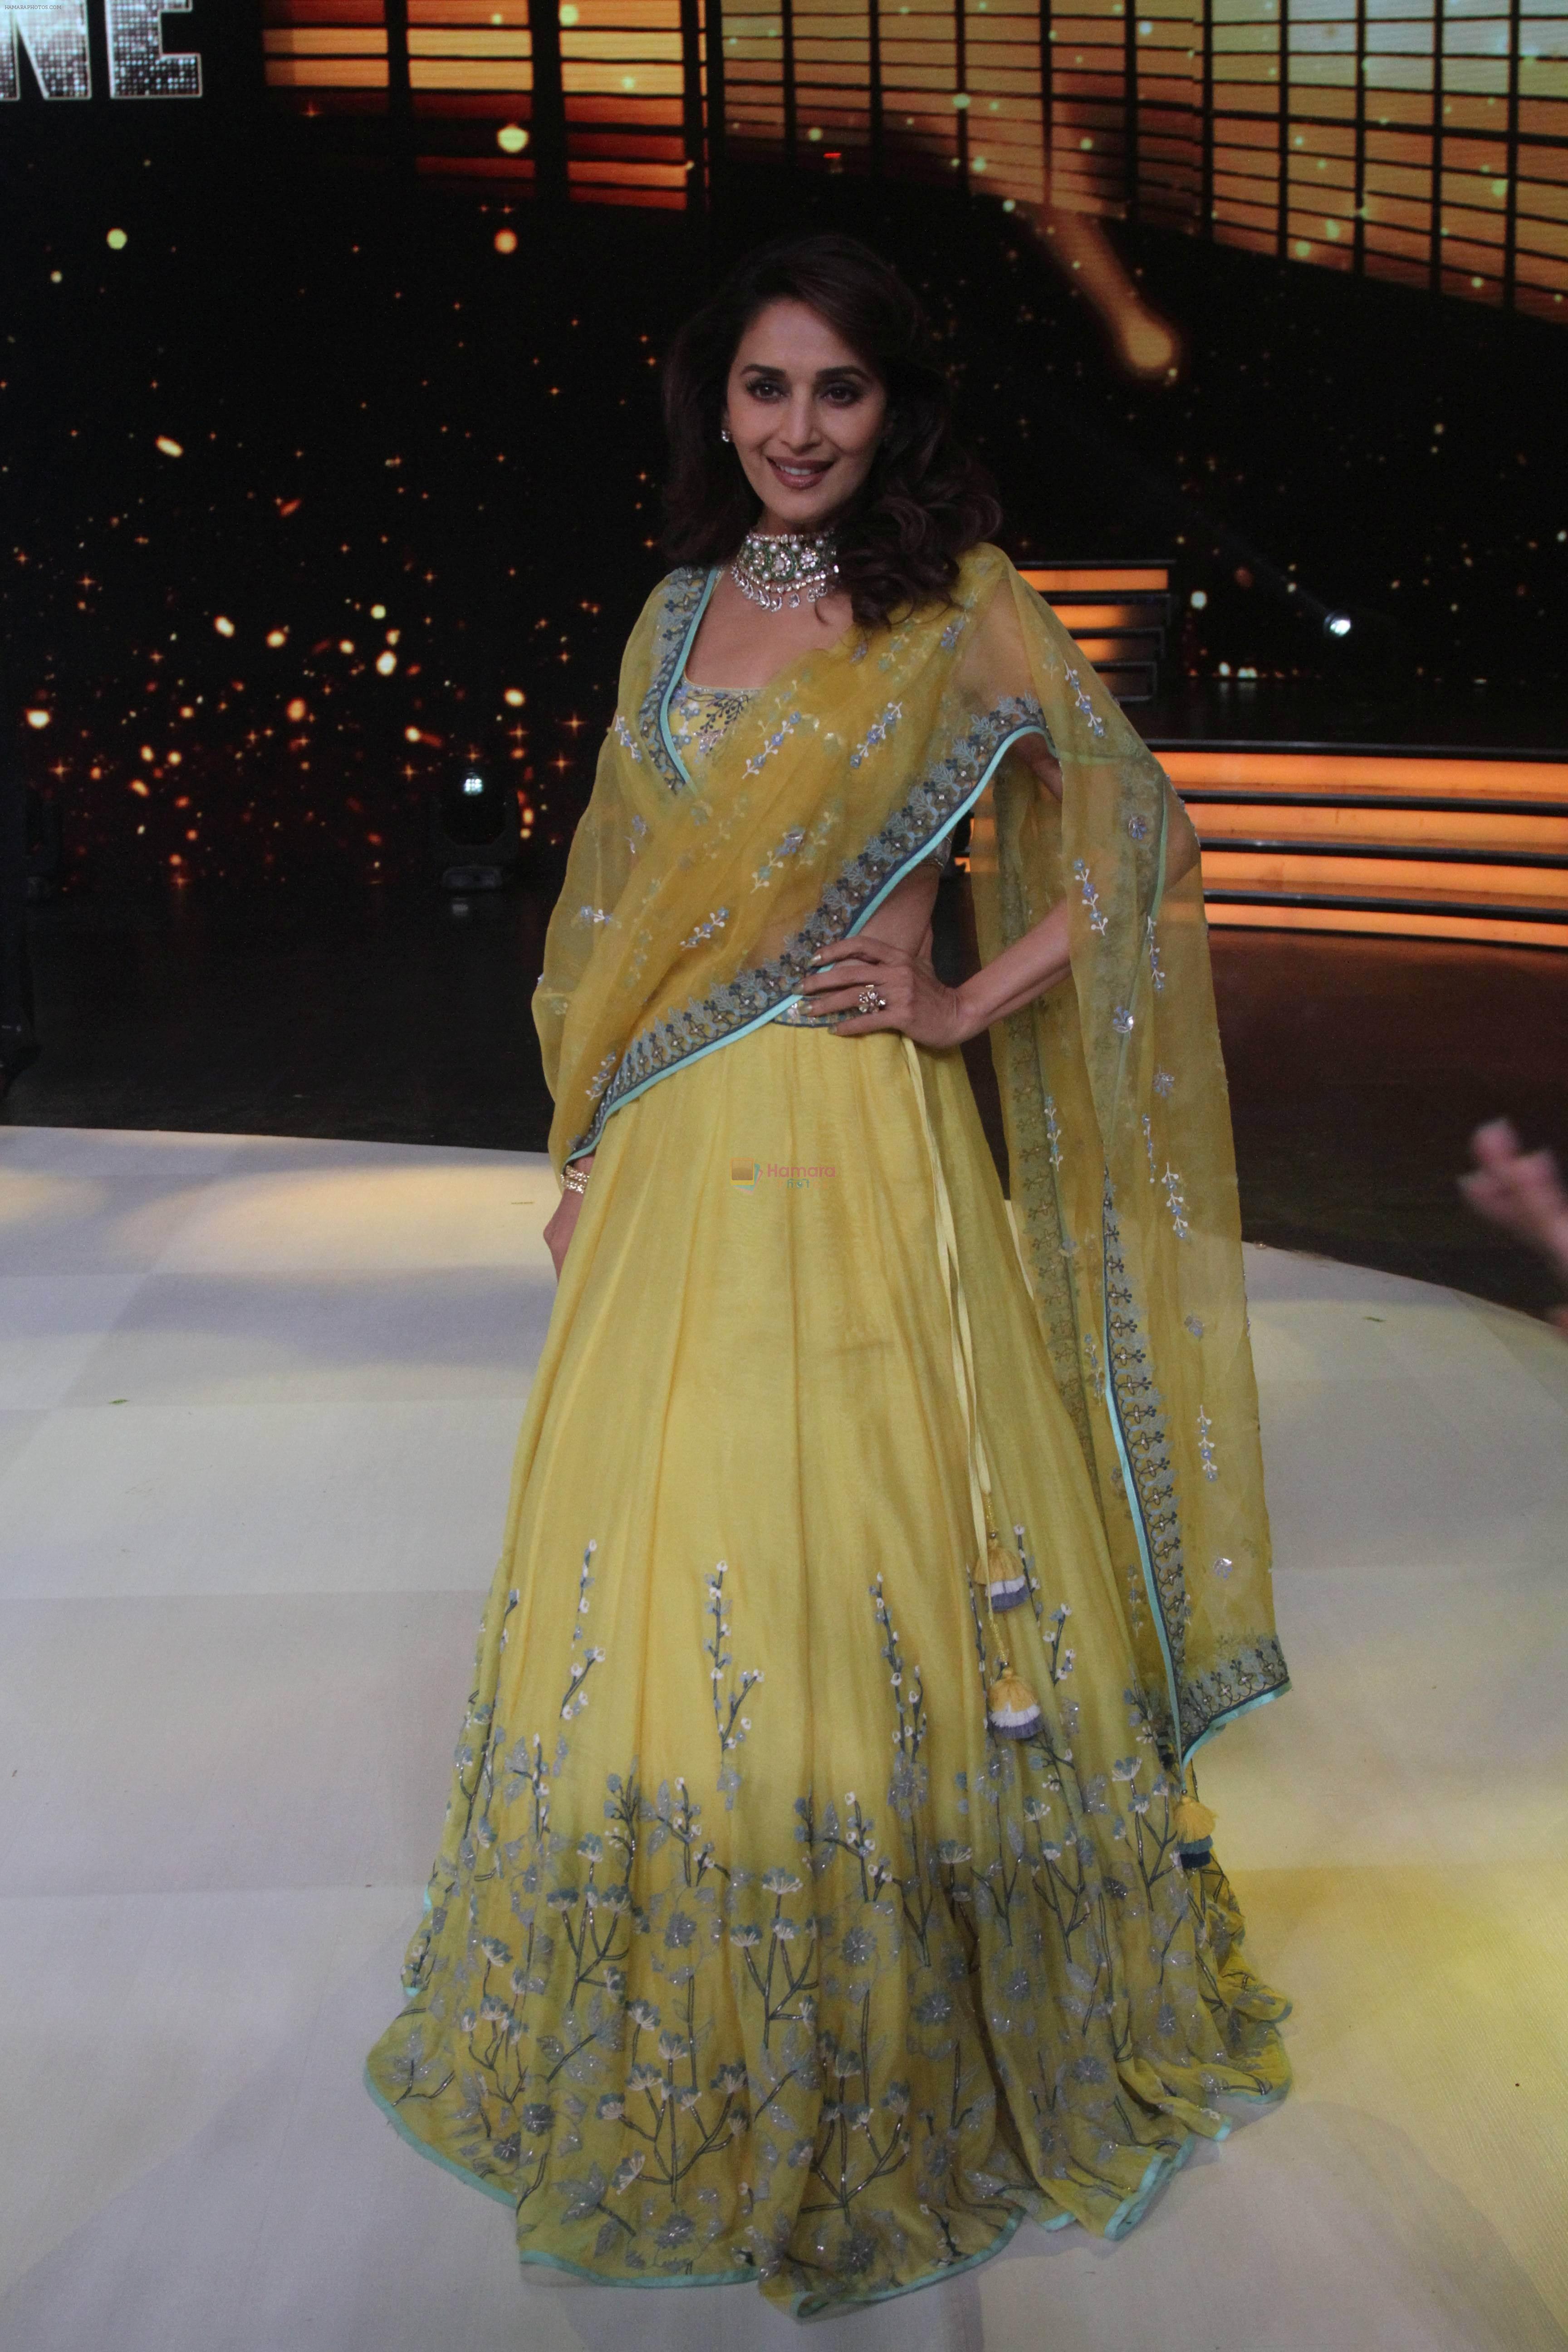 Madhuri Dixit on the sets of Color's Dance Deewane in Filmcity, Goregaon , Mumbai on 25th June 2018